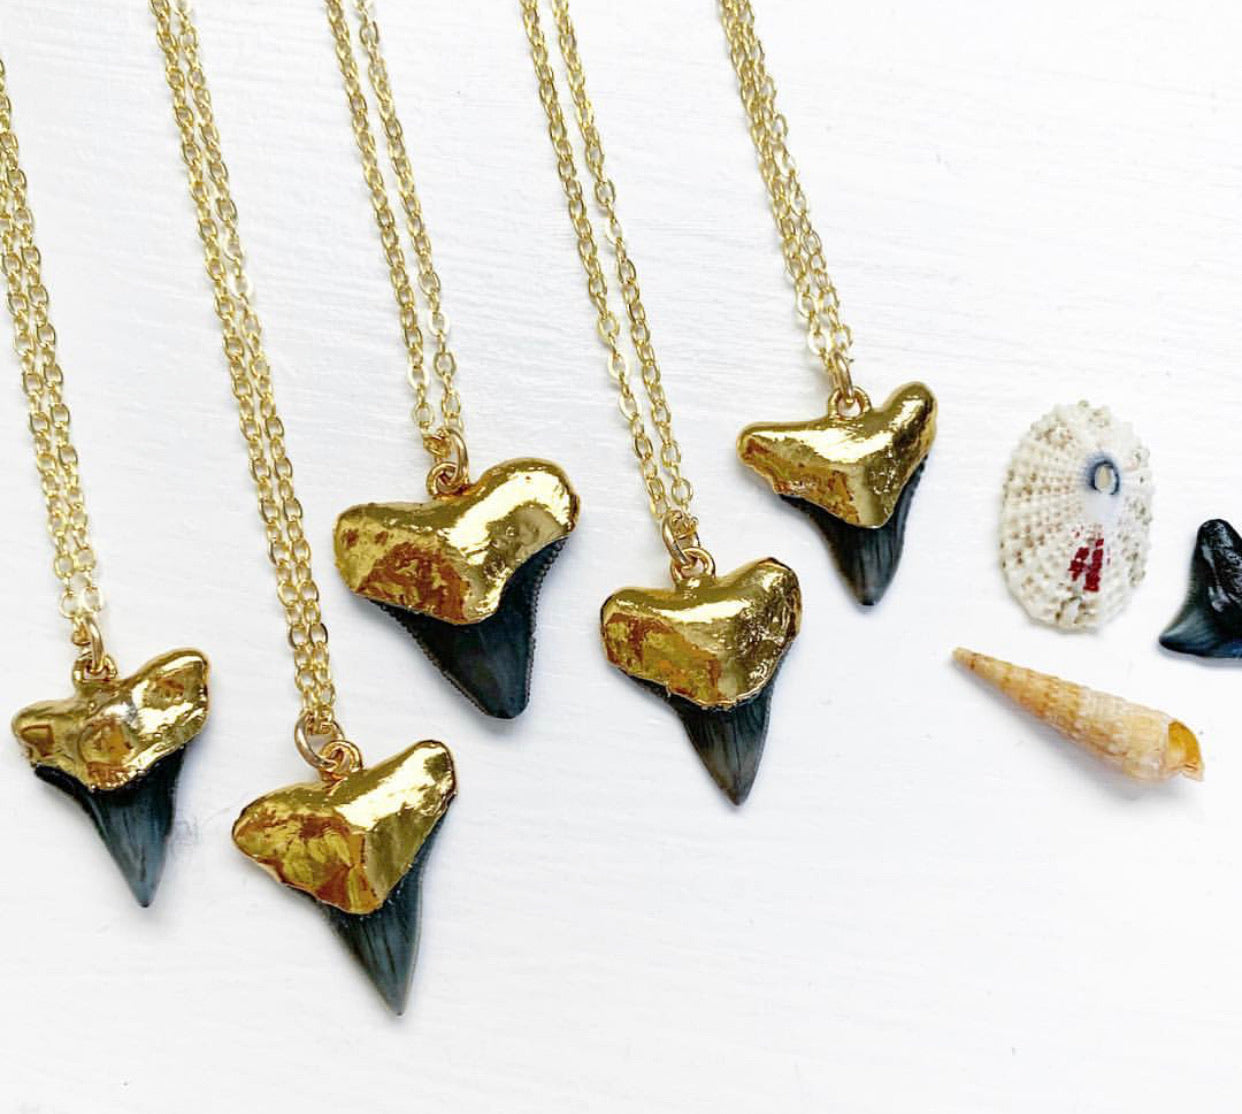 512-Shark Tooth Necklace